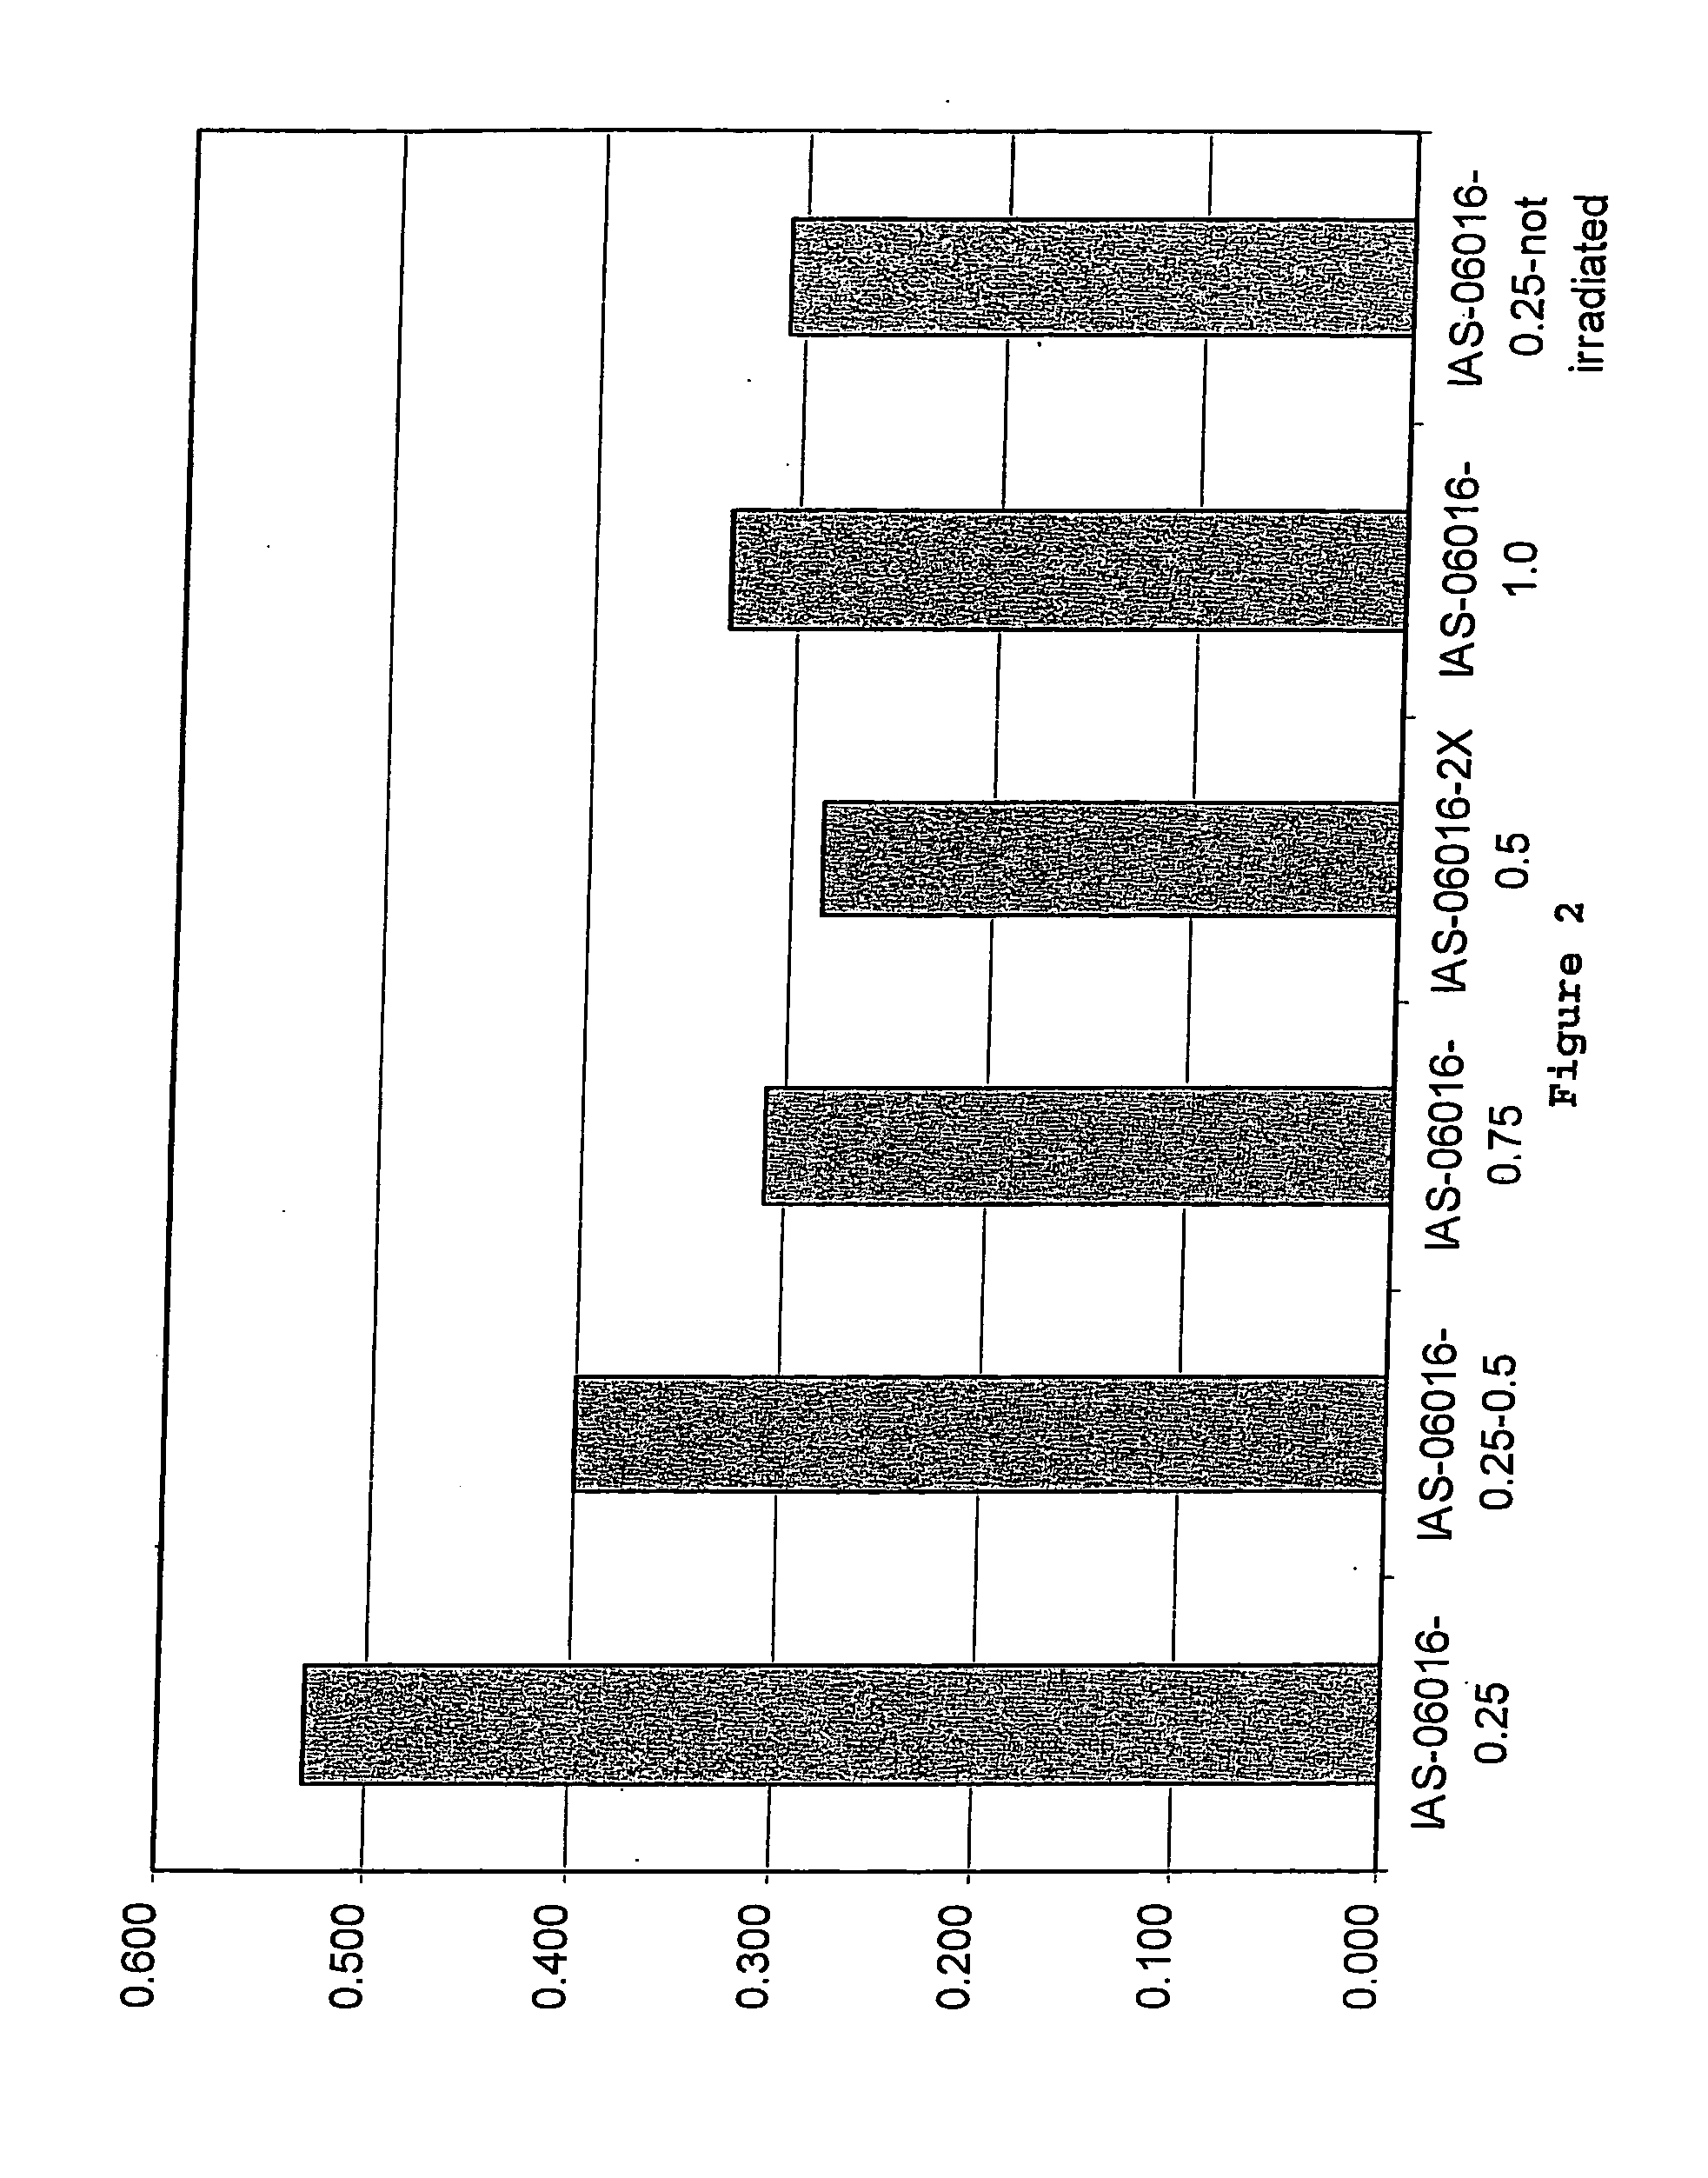 Collagen/glycosaminoglycan compositions for use as terminally sterilizable matrices